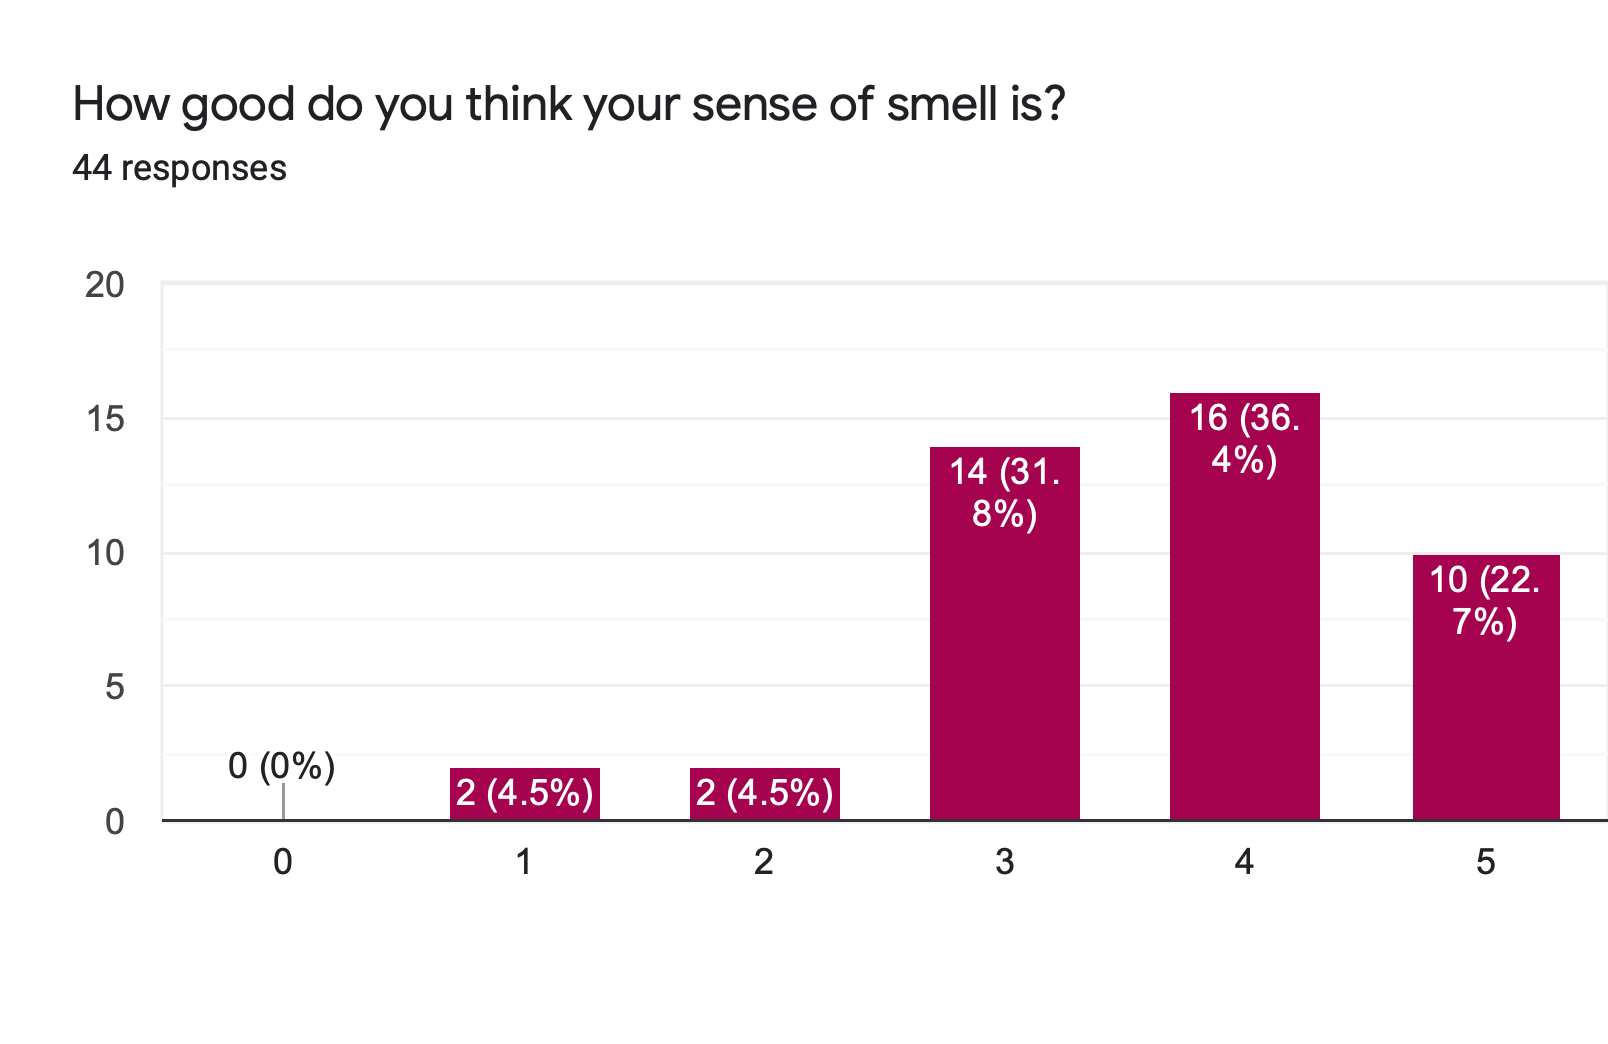 Forms response chart. Question title: How good do you think your sense of smell is?. Number of responses: 44 responses.